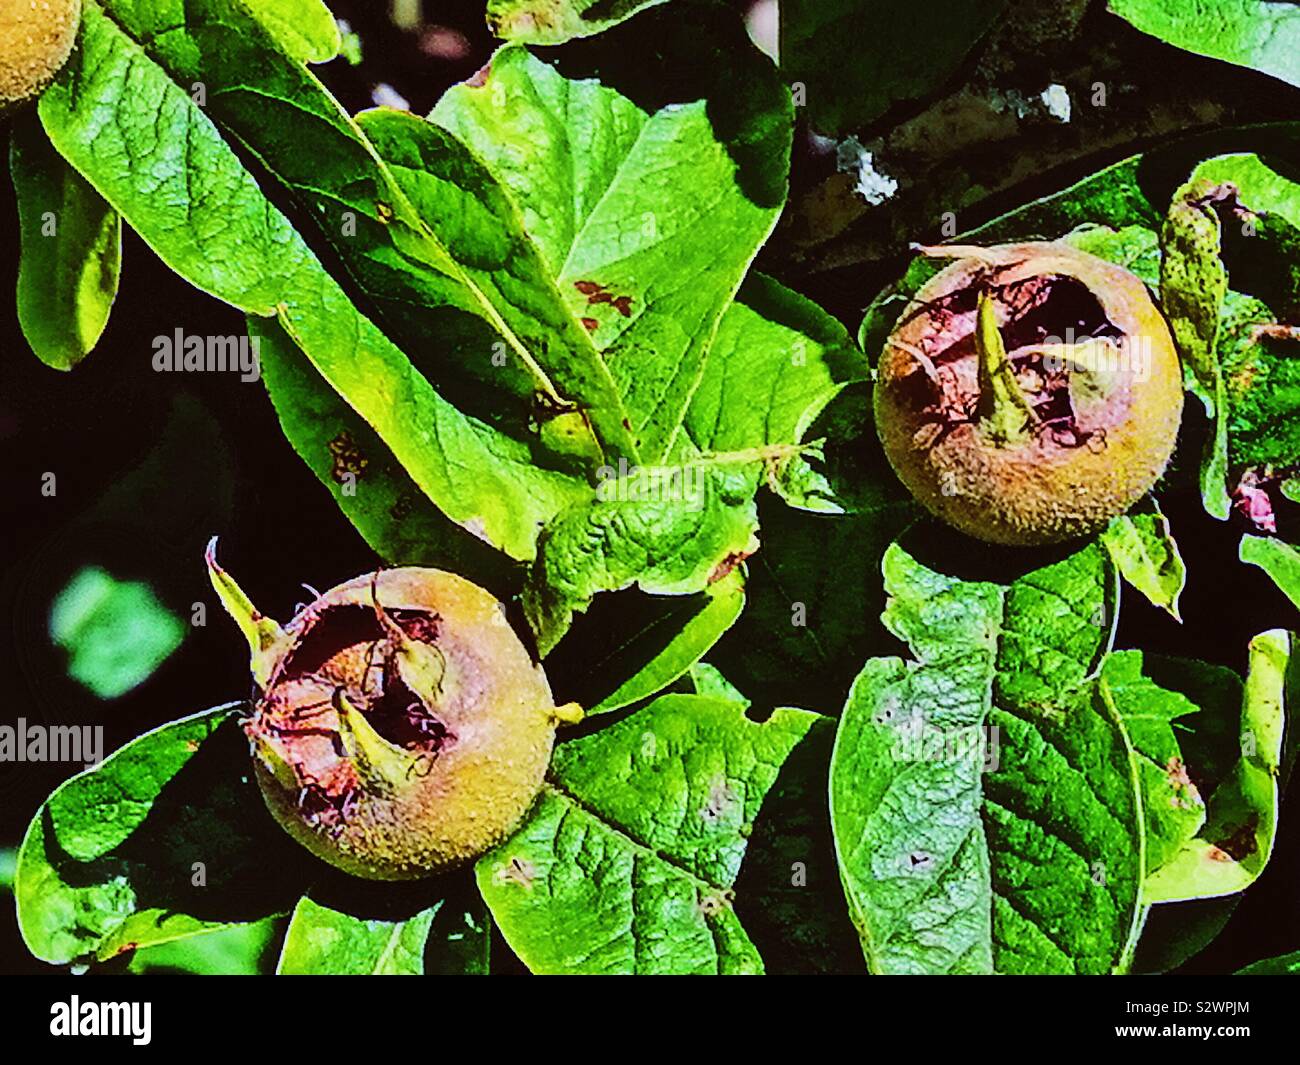 Medlar tree (Mespilus Germanica) with fruit. Fruit on this small tree has been cultivated since Roman times and is unusual in being available in winter and being eaten when bletted Stock Photo